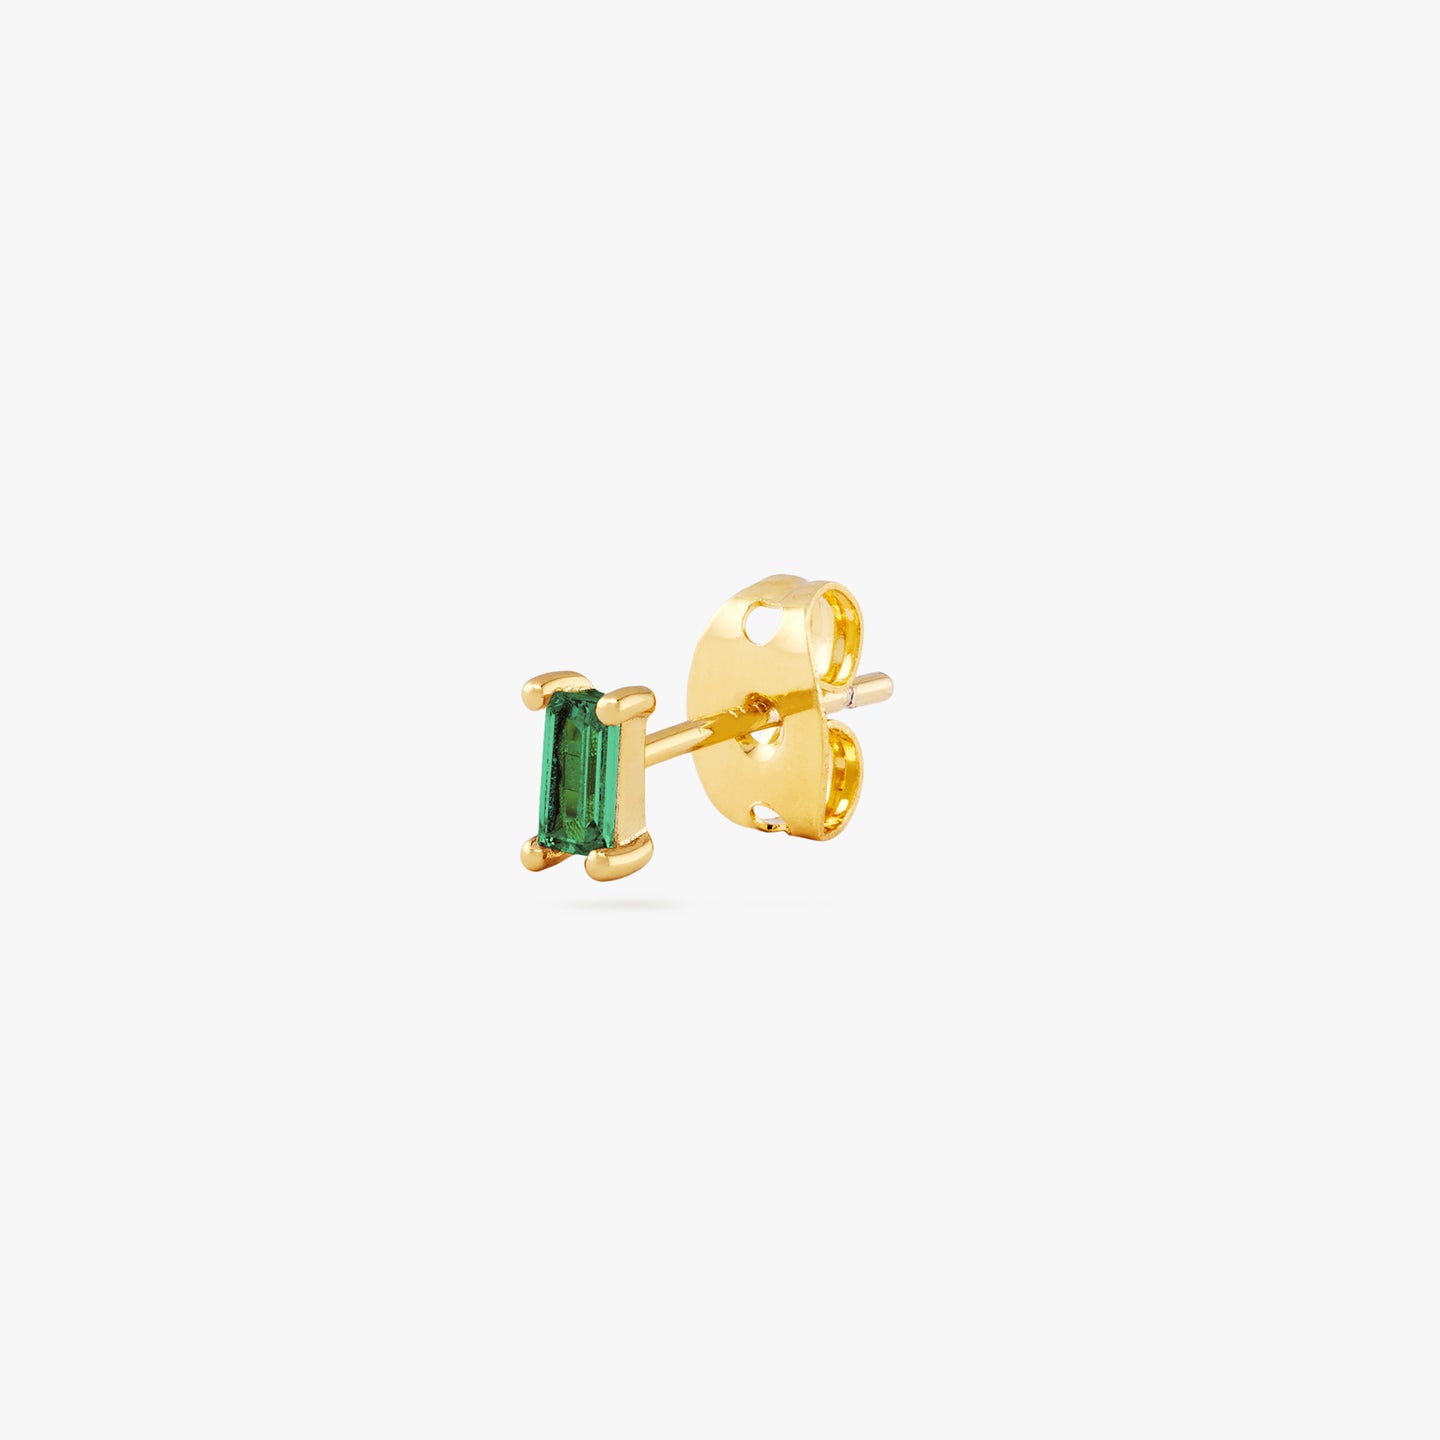 This is a gold baguette stud with a green CZ gem color:null|gold/green